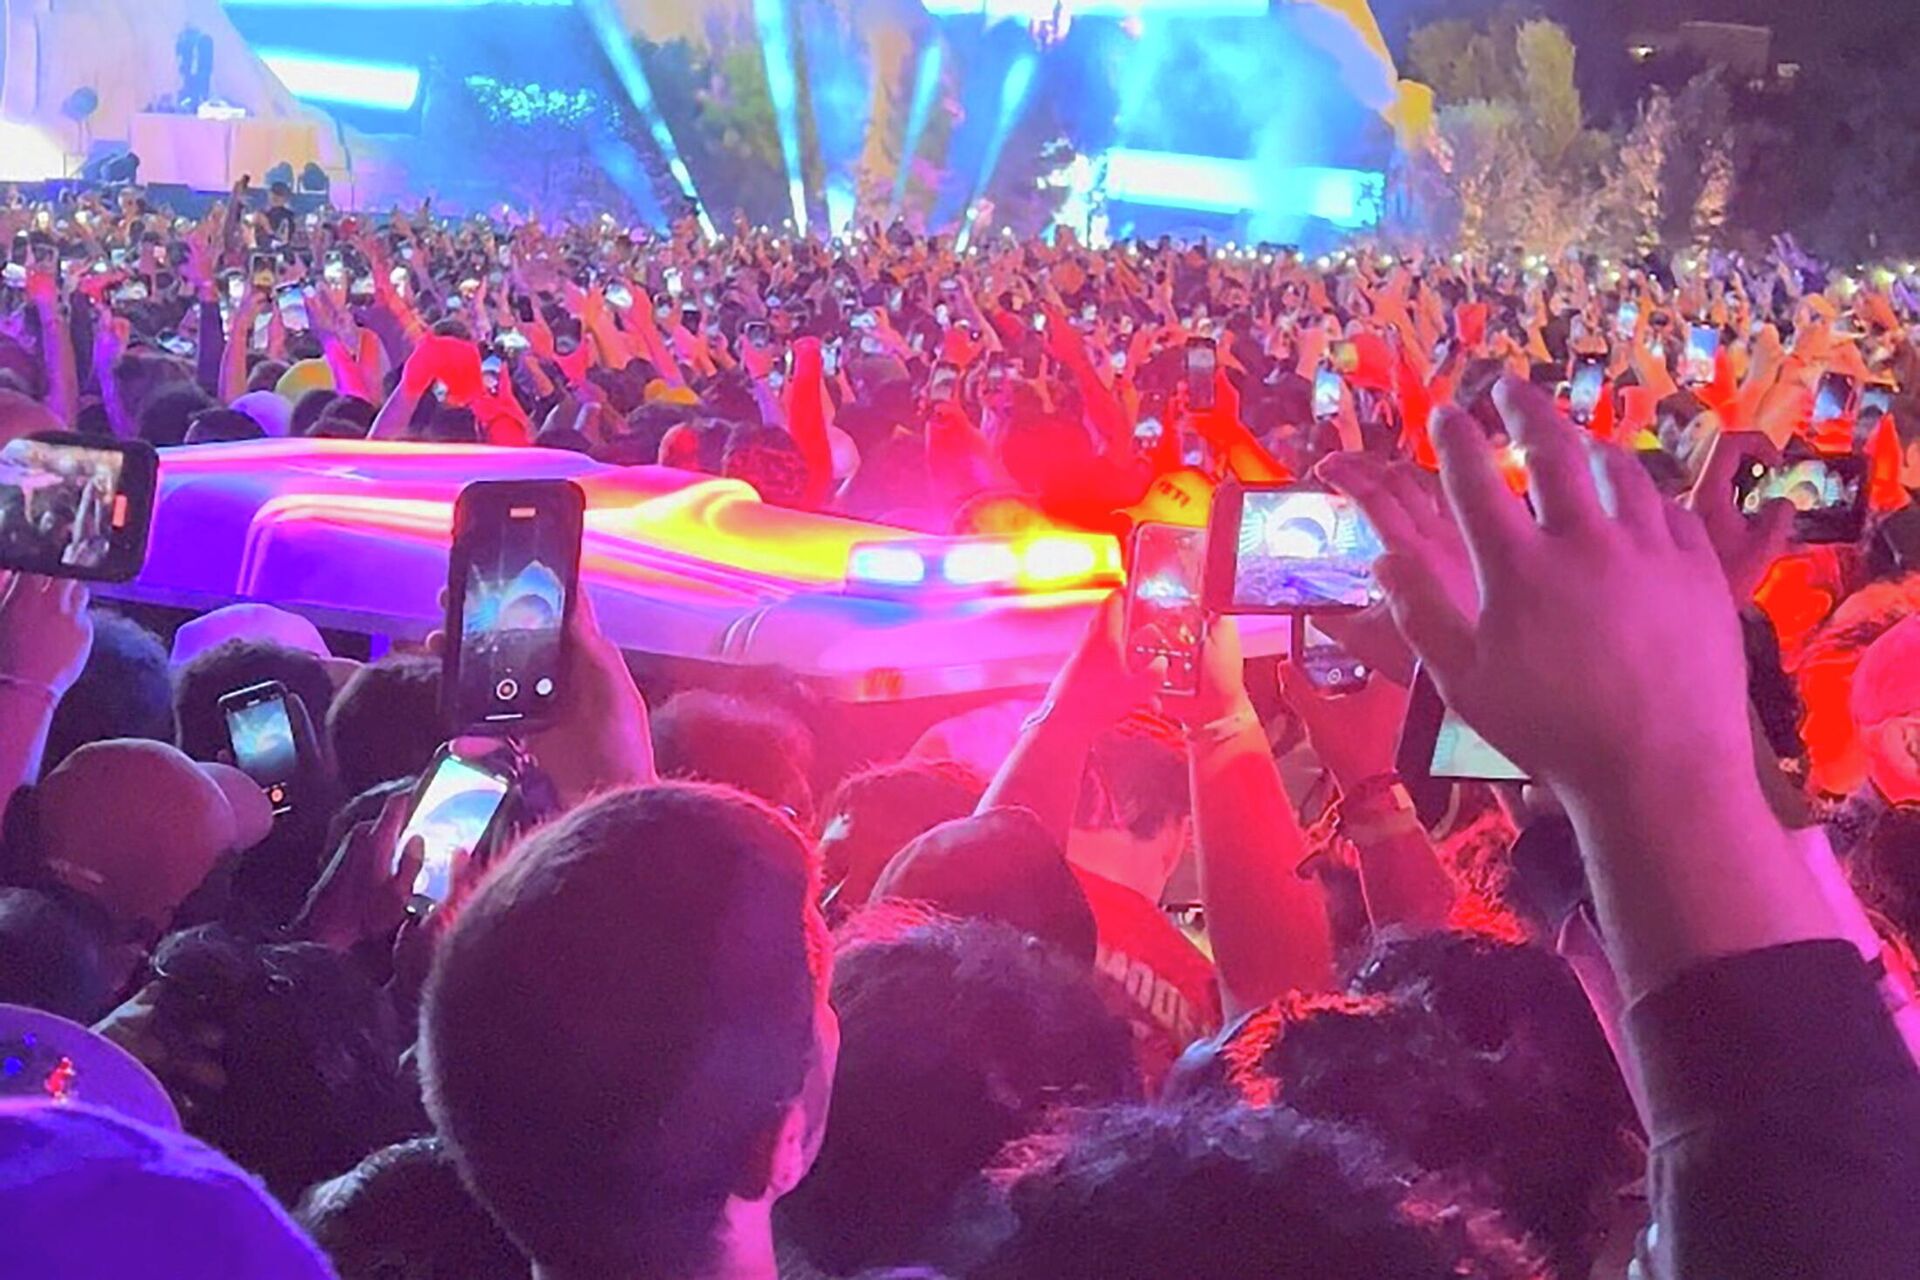 An ambulance is seen in the crowd during the Astroworld music festiwal in Houston, Texas, U.S., November 5, 2021 in this still image obtained from a social media video on November 6, 2021. - Sputnik International, 1920, 06.11.2021